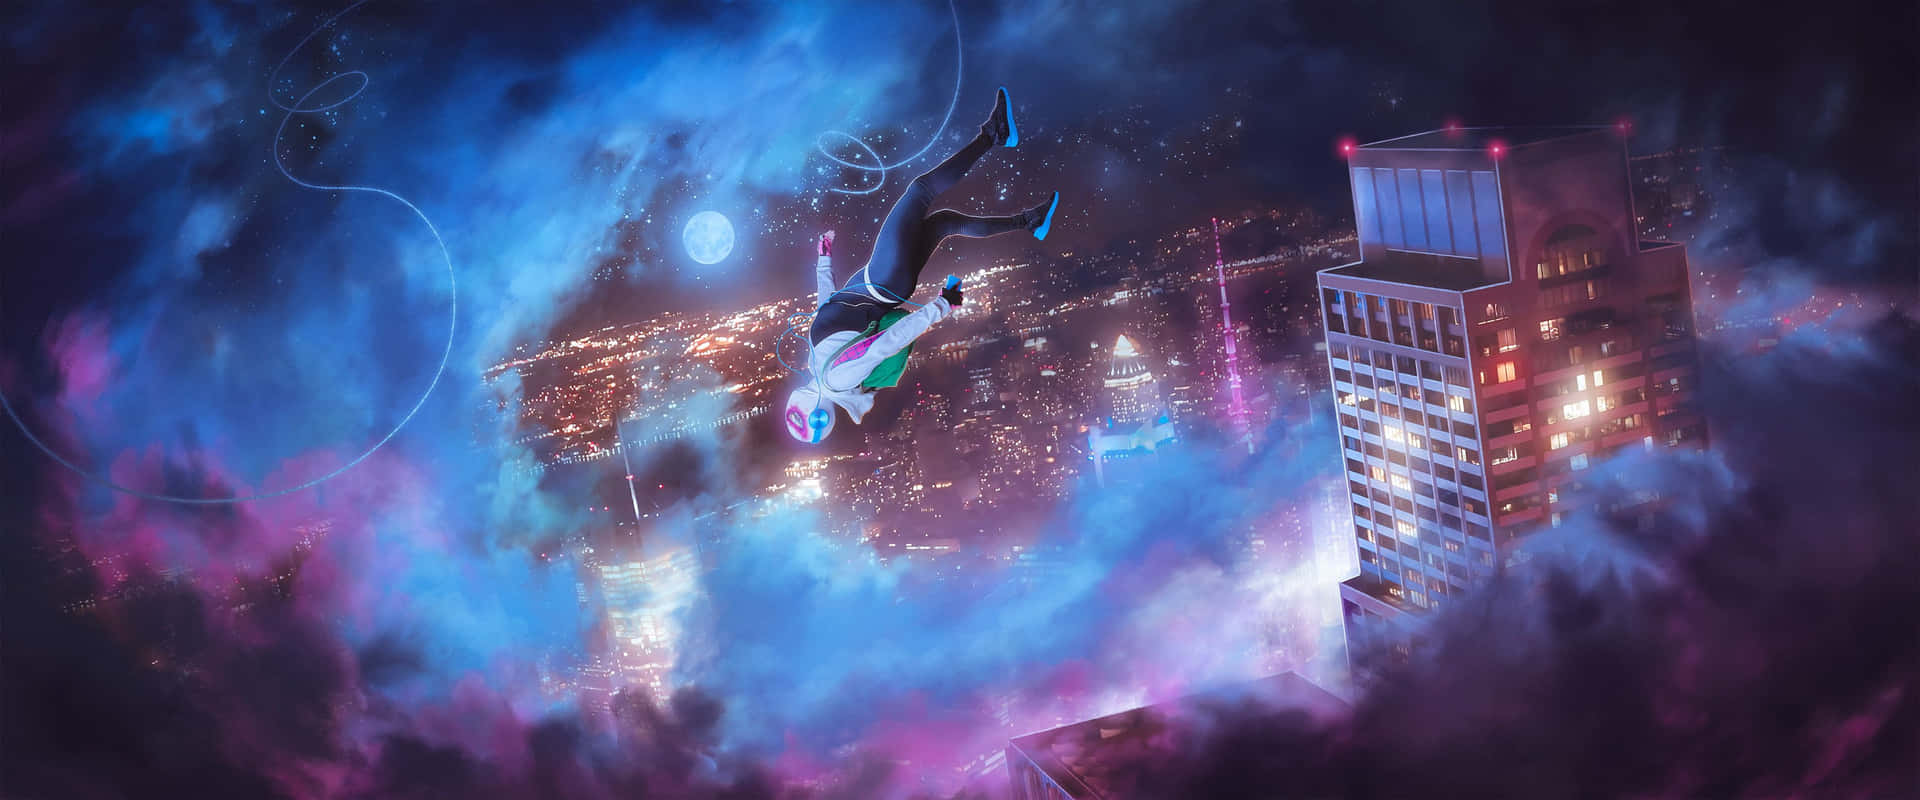 Spider Gwen Swoops In for an Explosive Mission